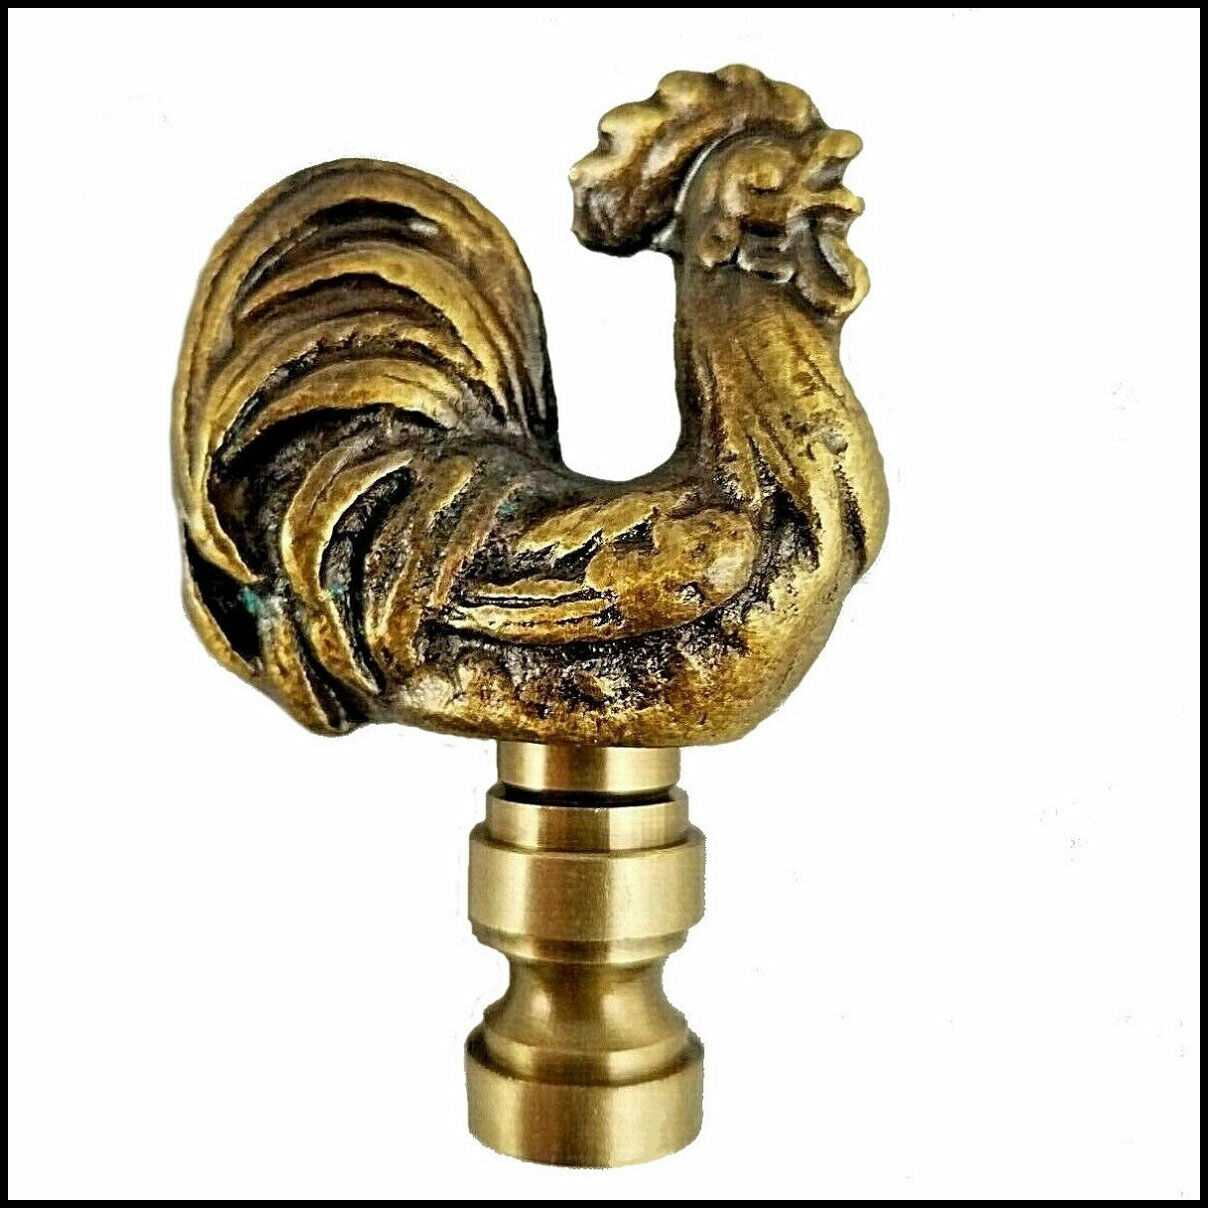 ANTIQUE  BRASS  ROOSTER  CHICKEN  ELECTRIC  LIGHTING  LAMP  SHADE  FINIAL (B)